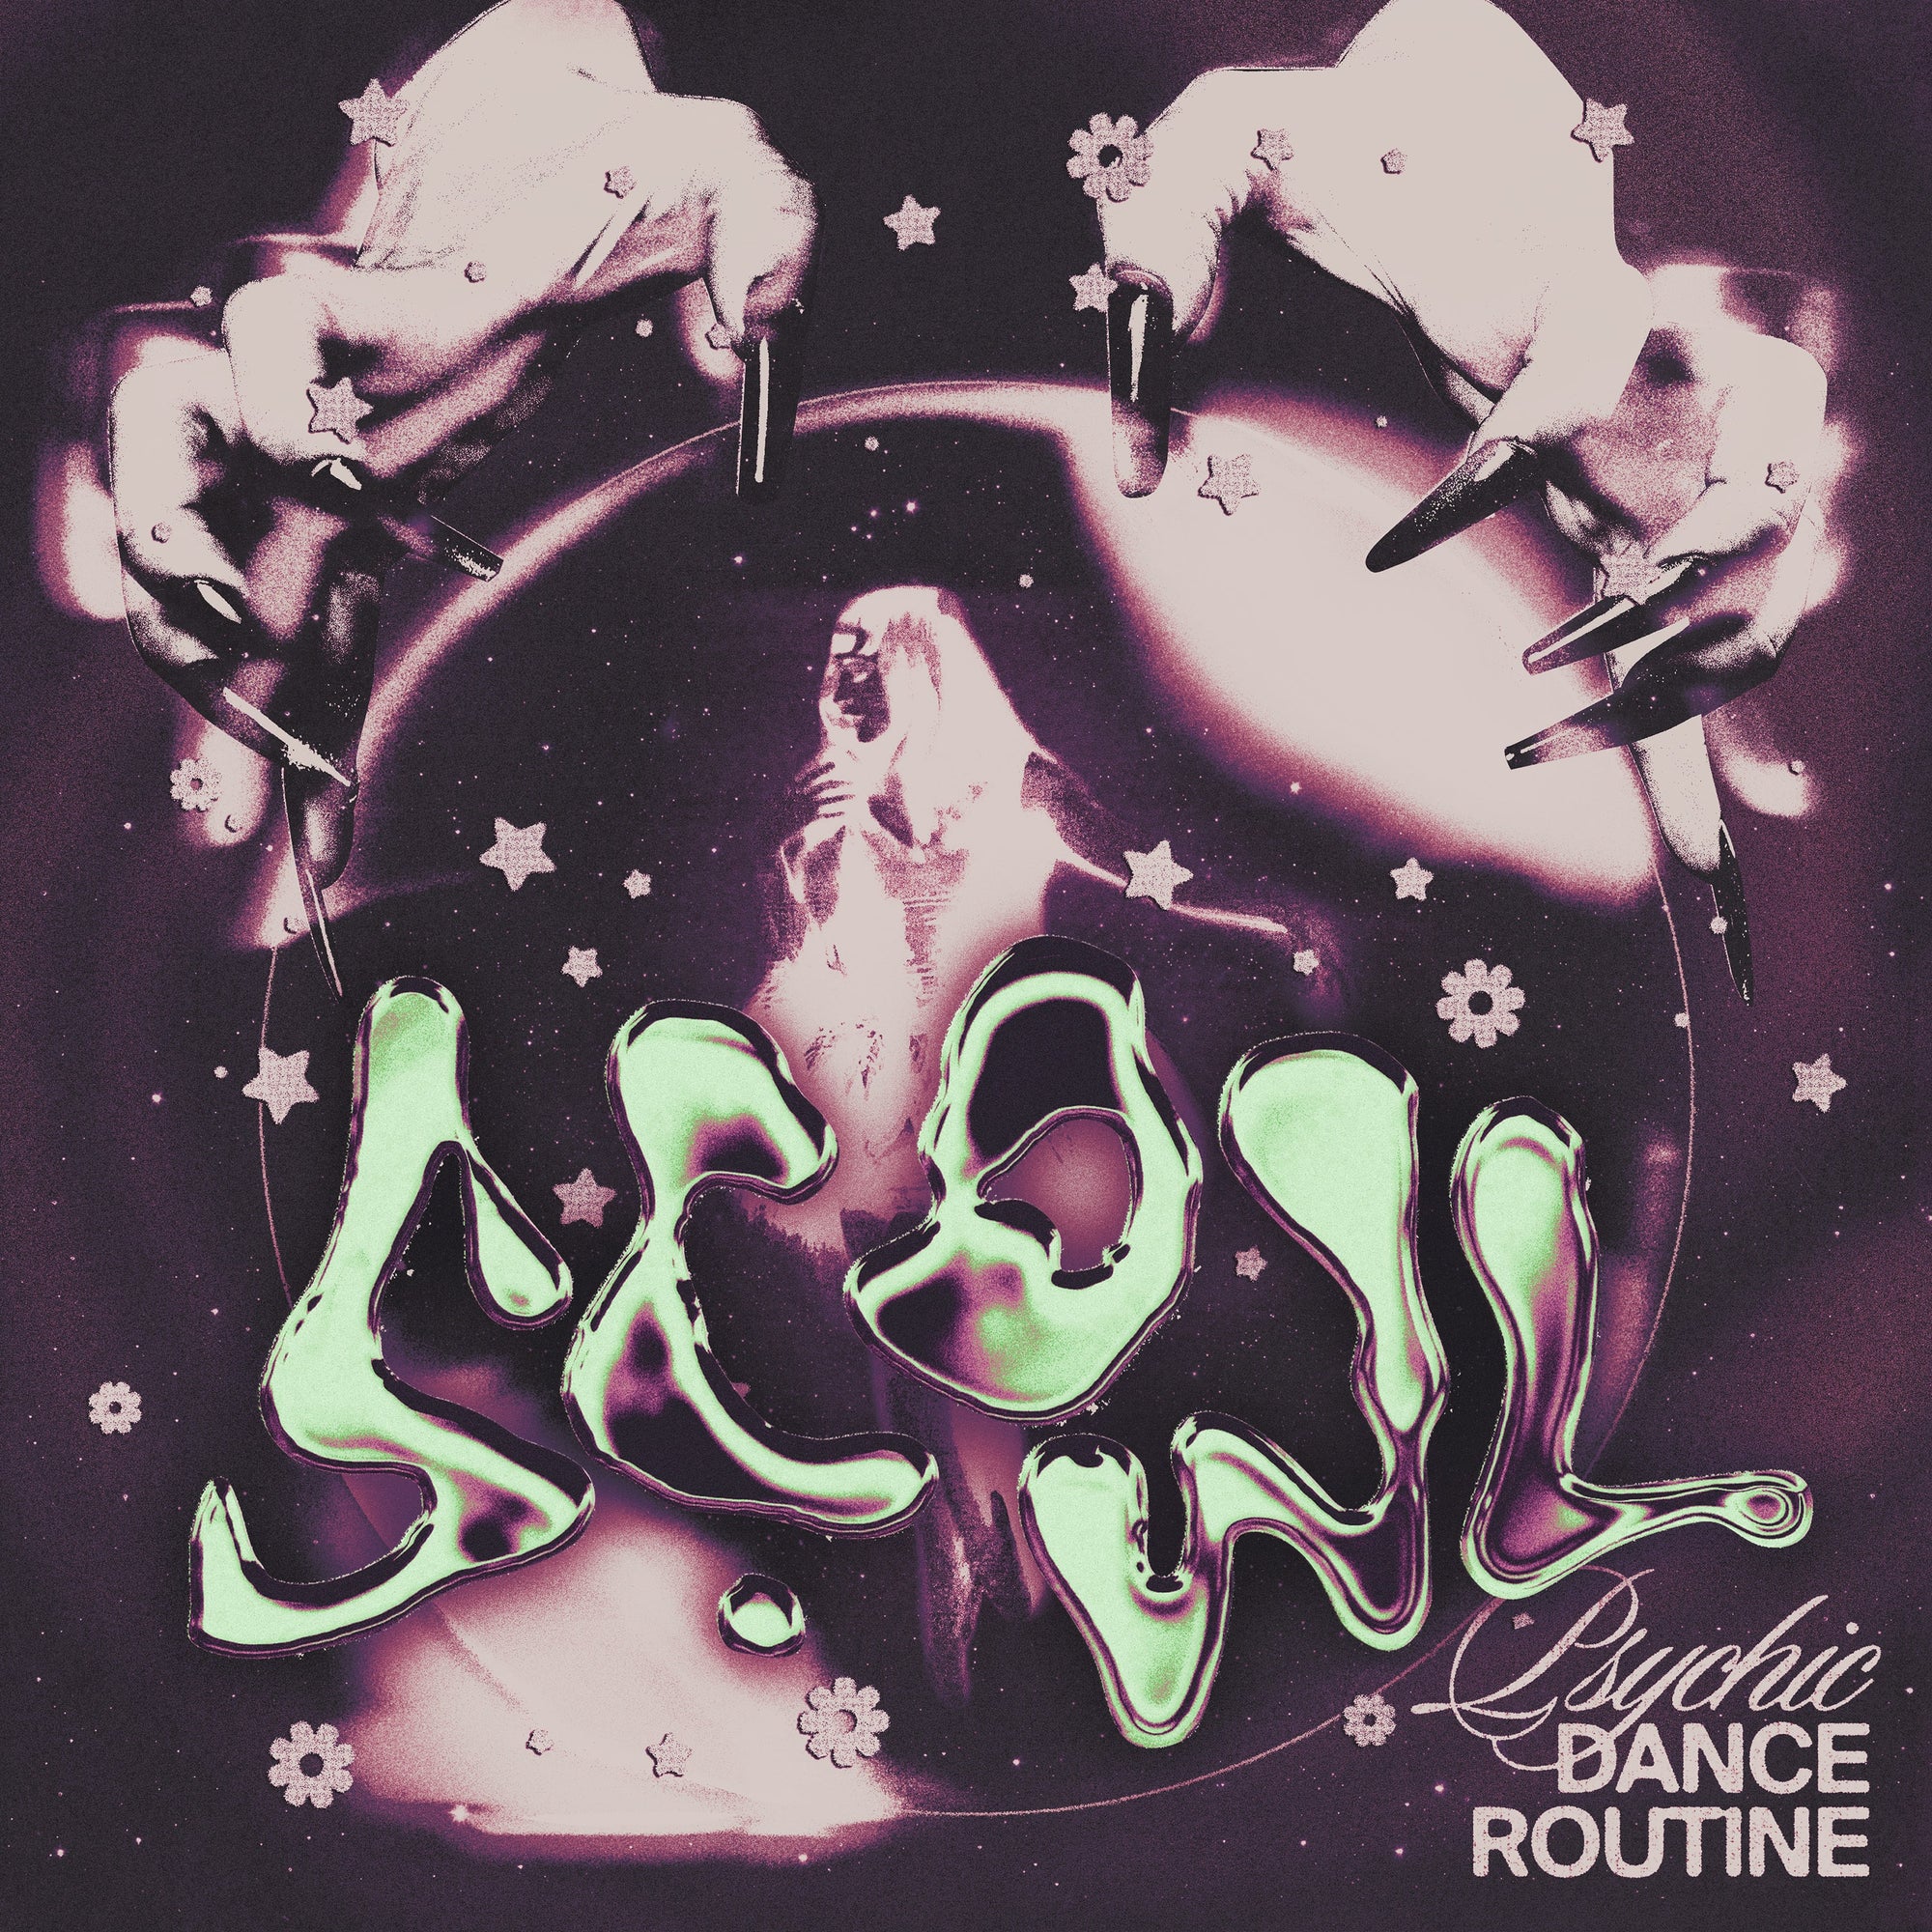 Scowl (Psychic Dance Routine) Album Cover Poster - Lost Posters